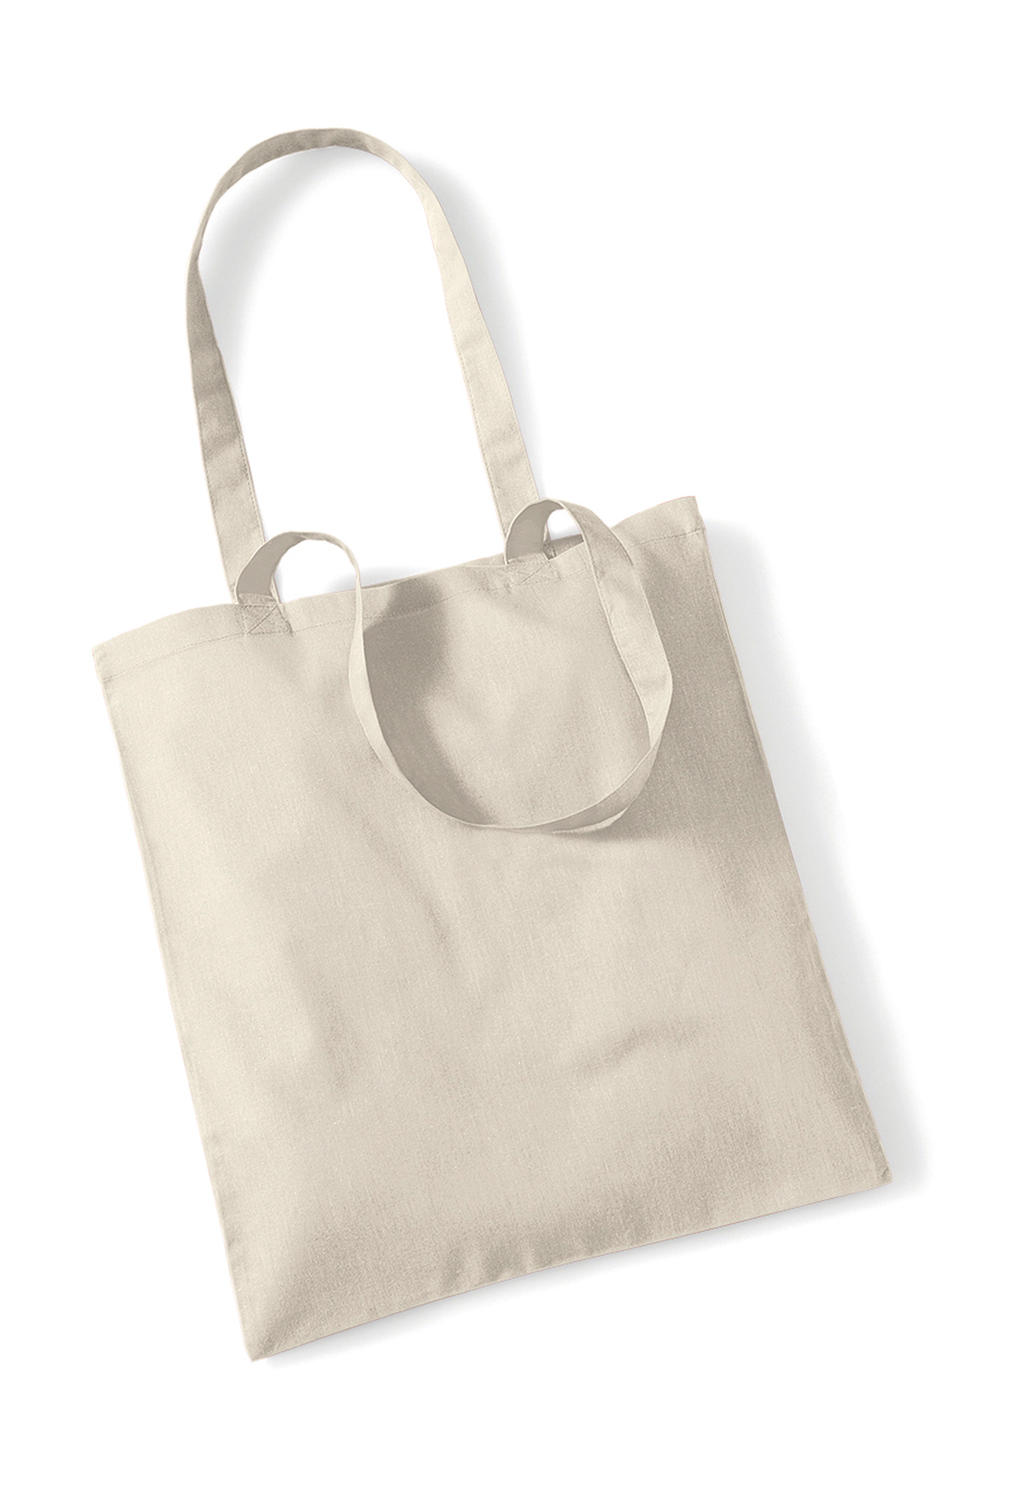  Bag for Life - Long Handles in Farbe Sand